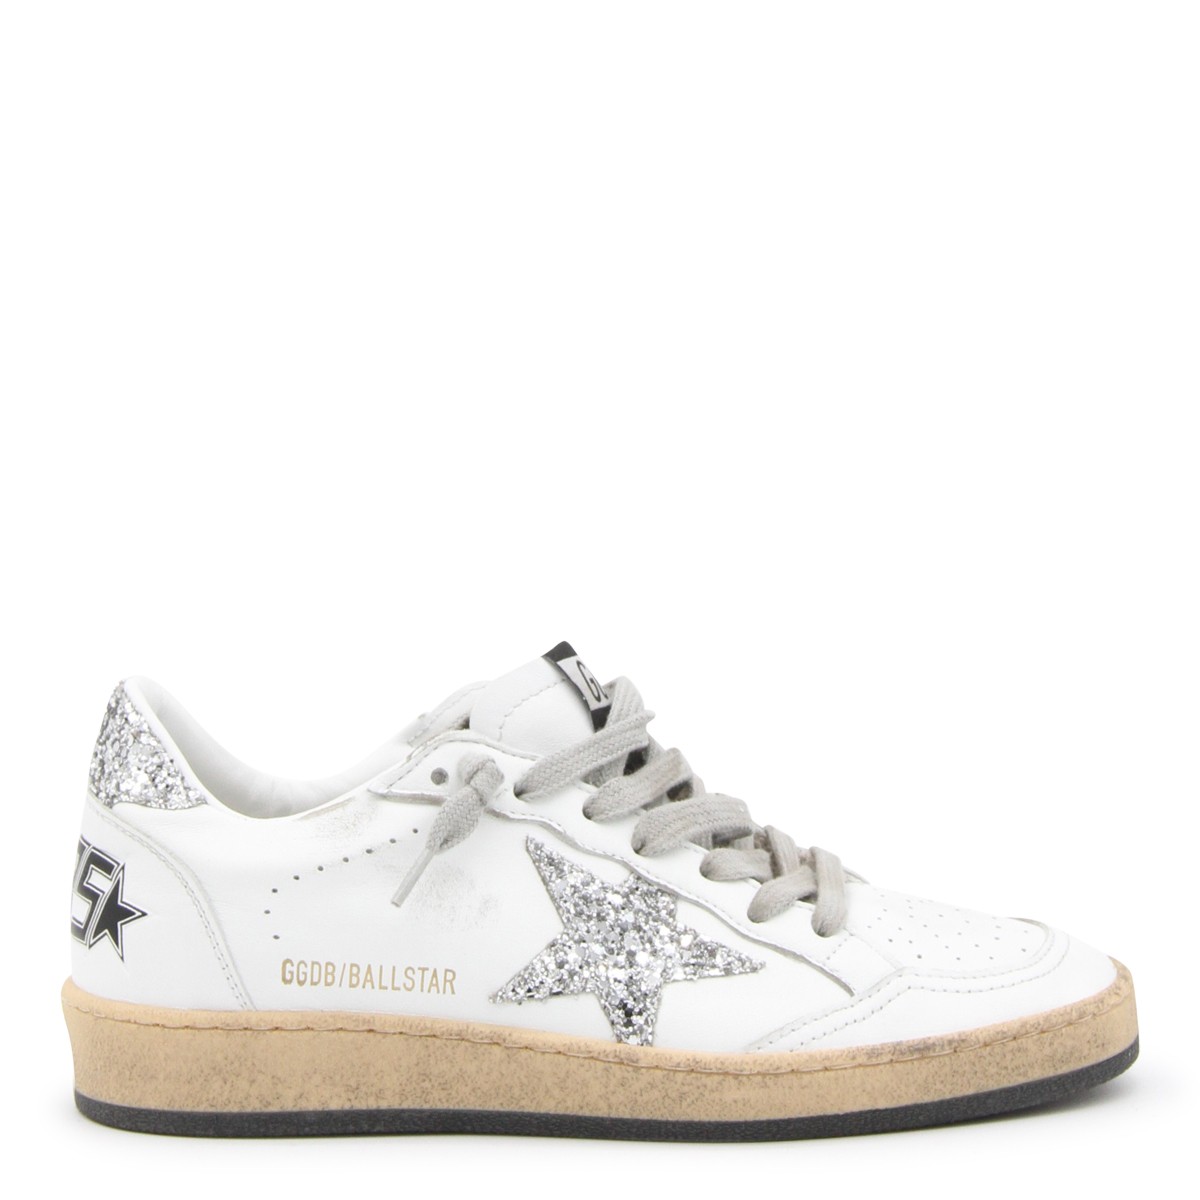 WHITE AND SILVER LEATHER BALL STAR LOW TOP SNEAKERS